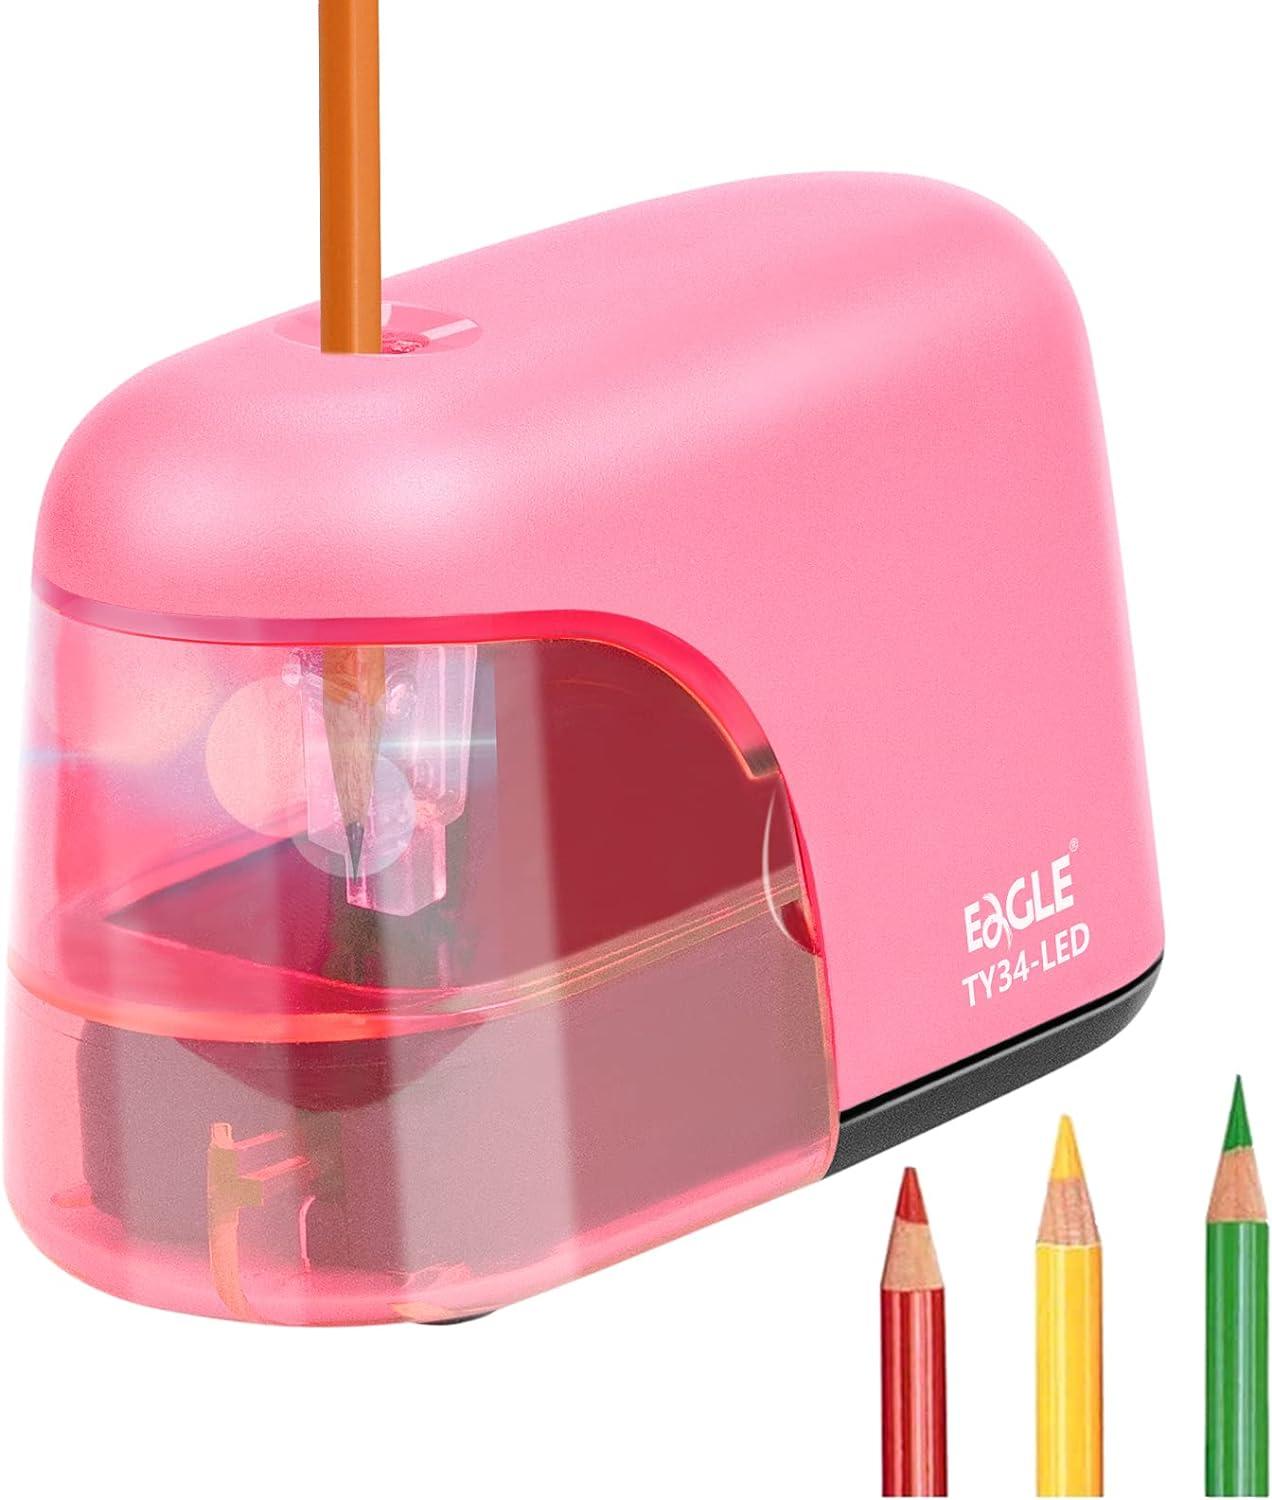 eagle battery operated electric pencil sharpener with led light shining during sharpening pencil pink  eagle